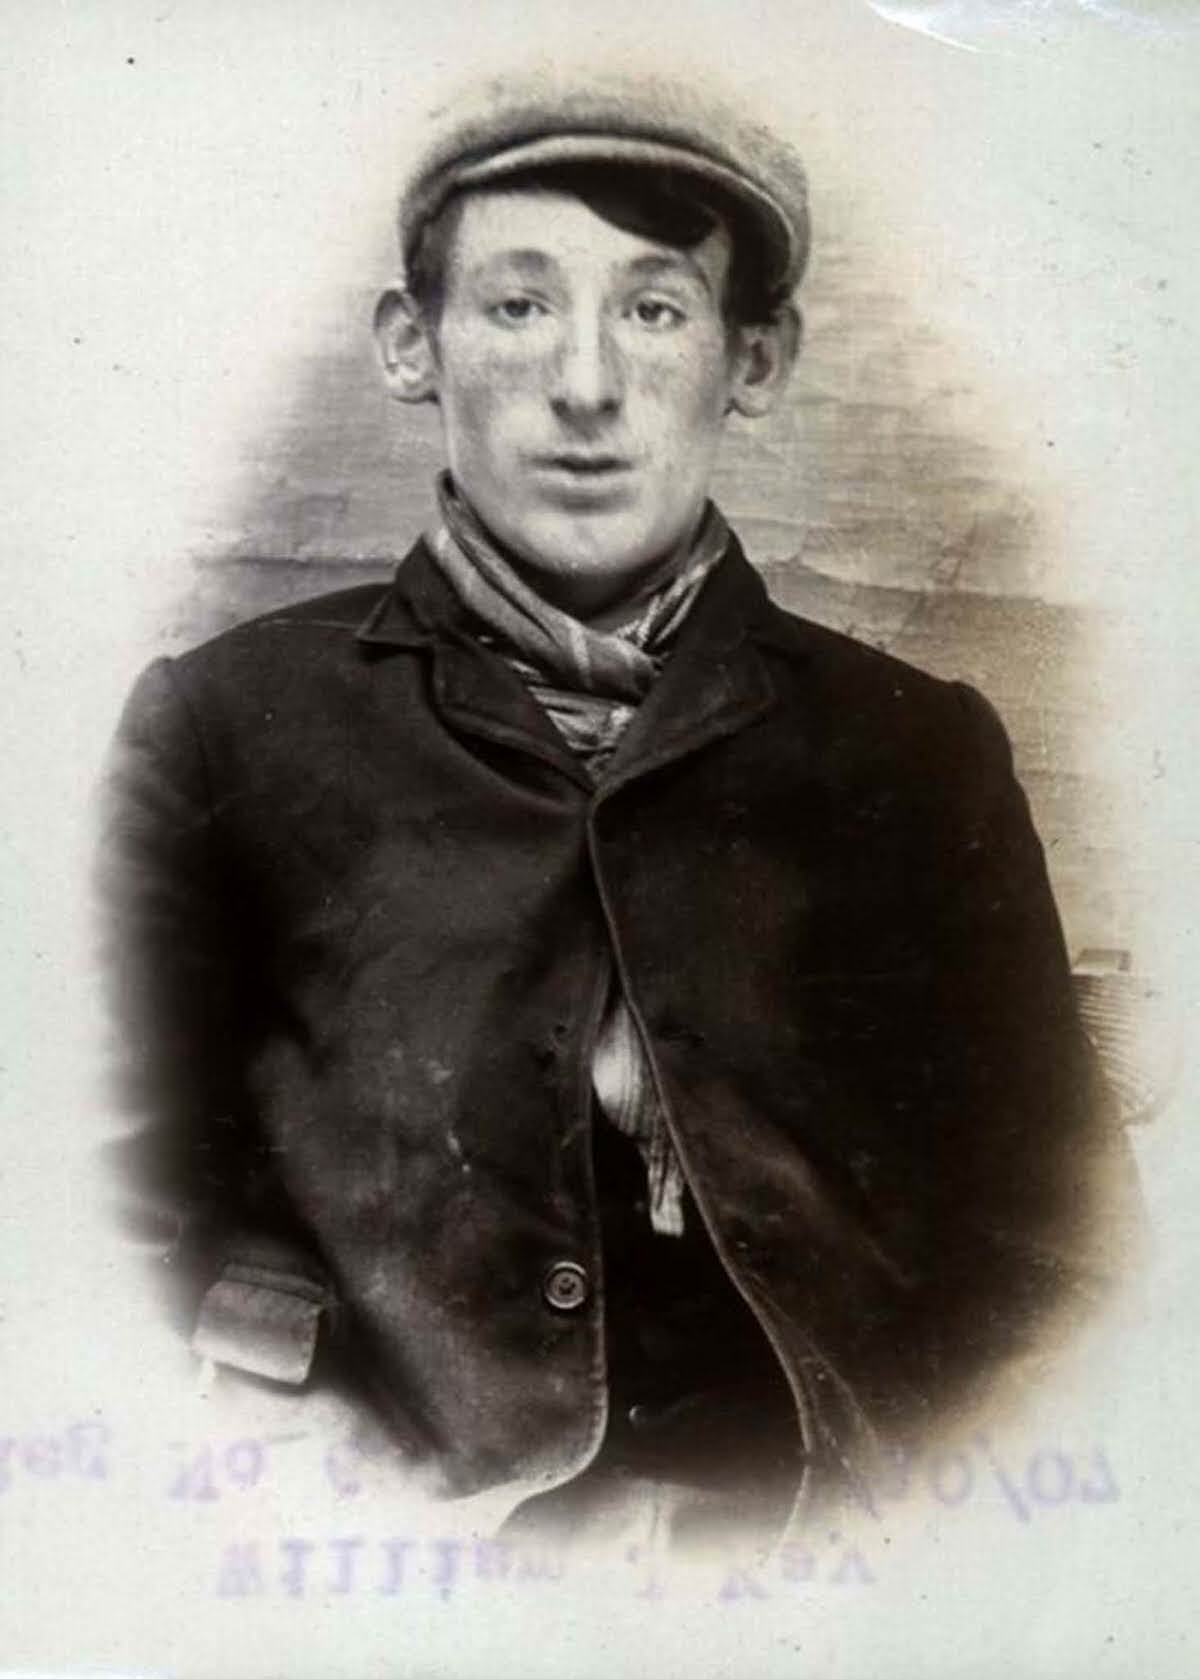 William J. Kay, 18, arrested on suspicion of planning to commit a felony, 1907.